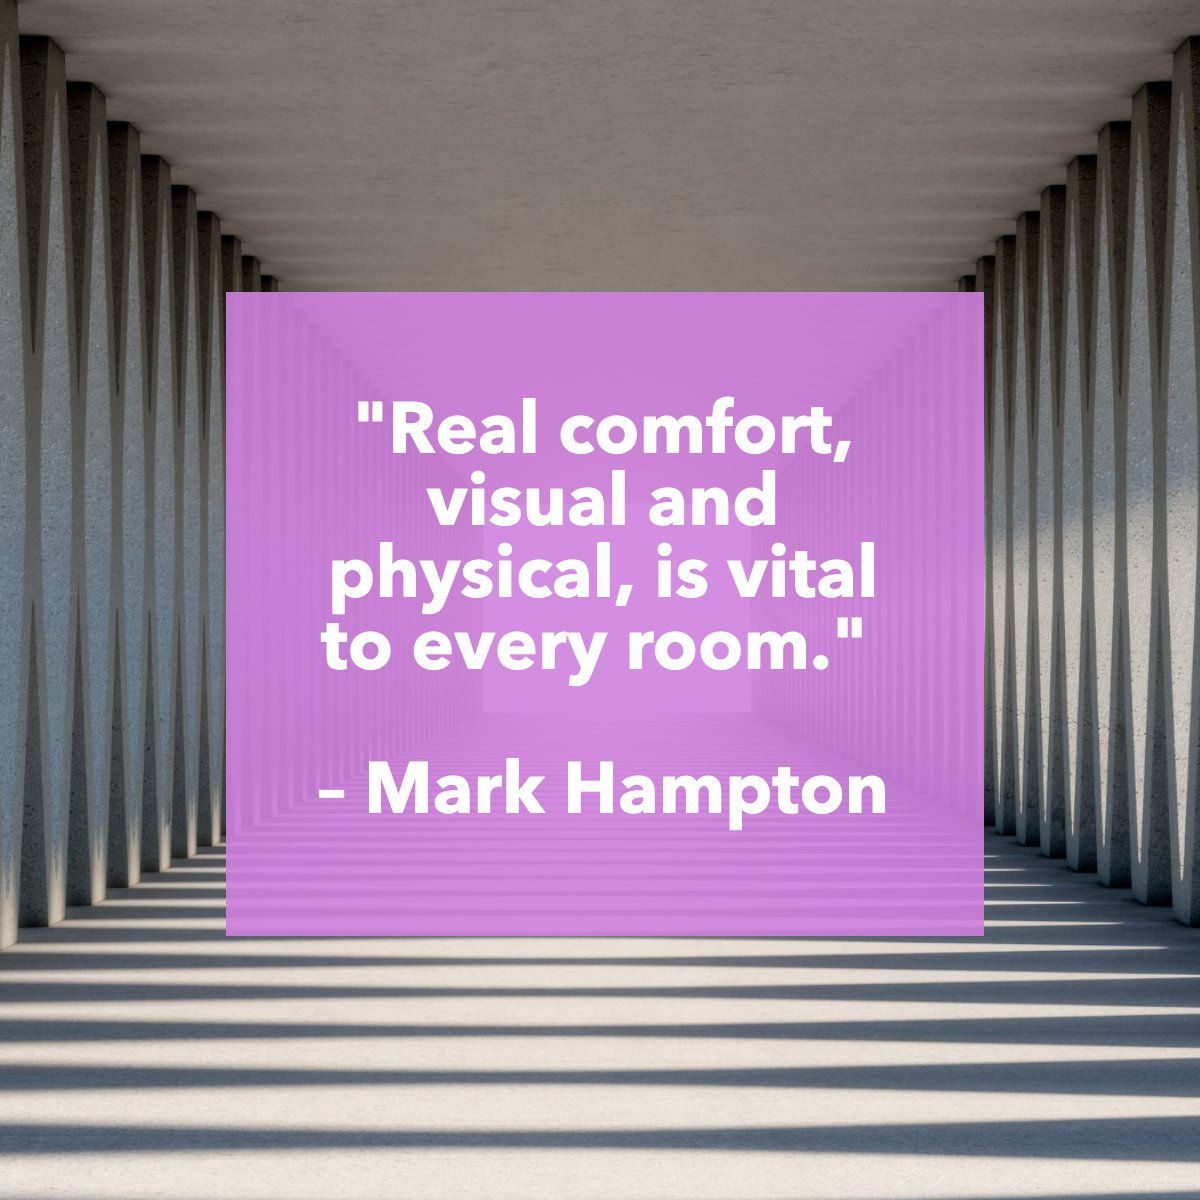 📖'Real comfort, visual and physical, is vital to every room.'
–  Mark
 #RanchoCucamongaRealEstate #JoeLimoBroker #RealEstateBroker #Realtor #RealEstateAgent #InlandEmpireHomes #InlandEmpireRealtor #Rialto #Ontario #Upland #Claremont #Redlands #Fontana #Whittier